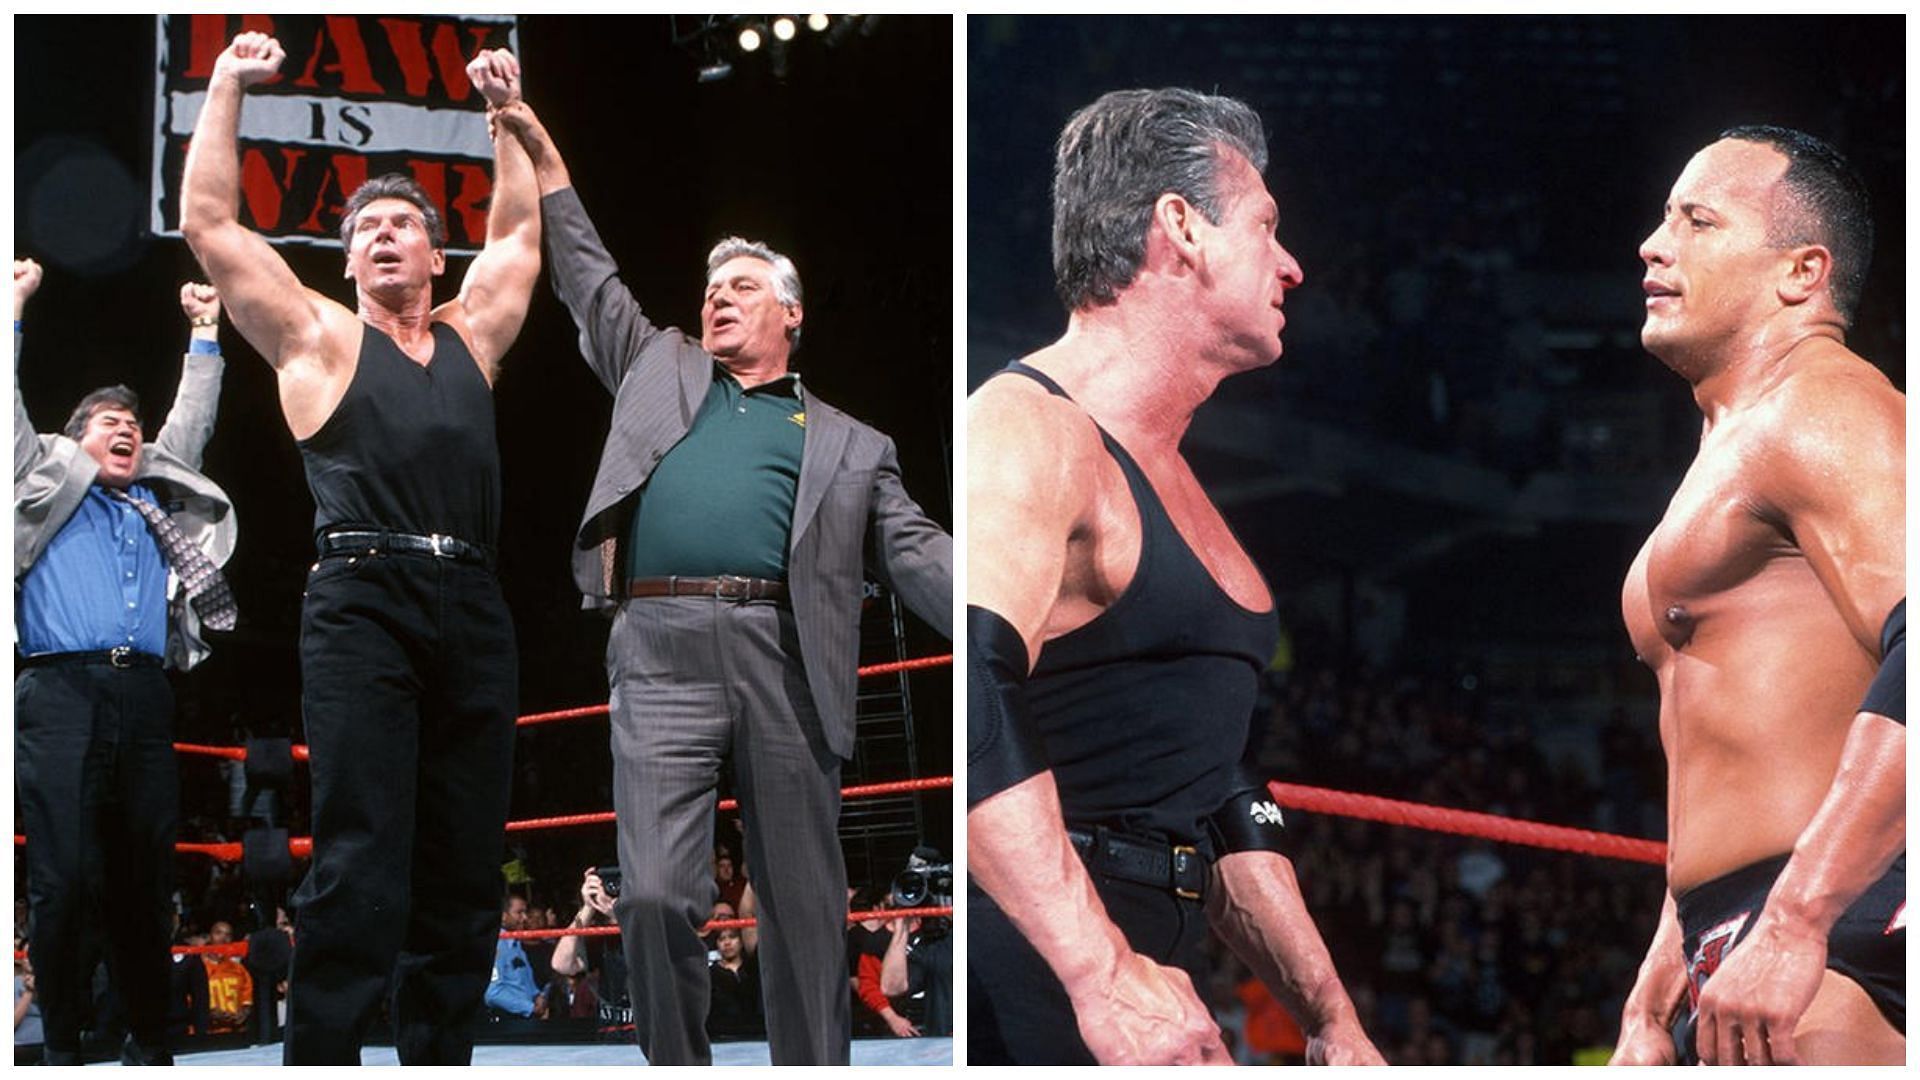 Vince McMahon is a former CEO of WWE.